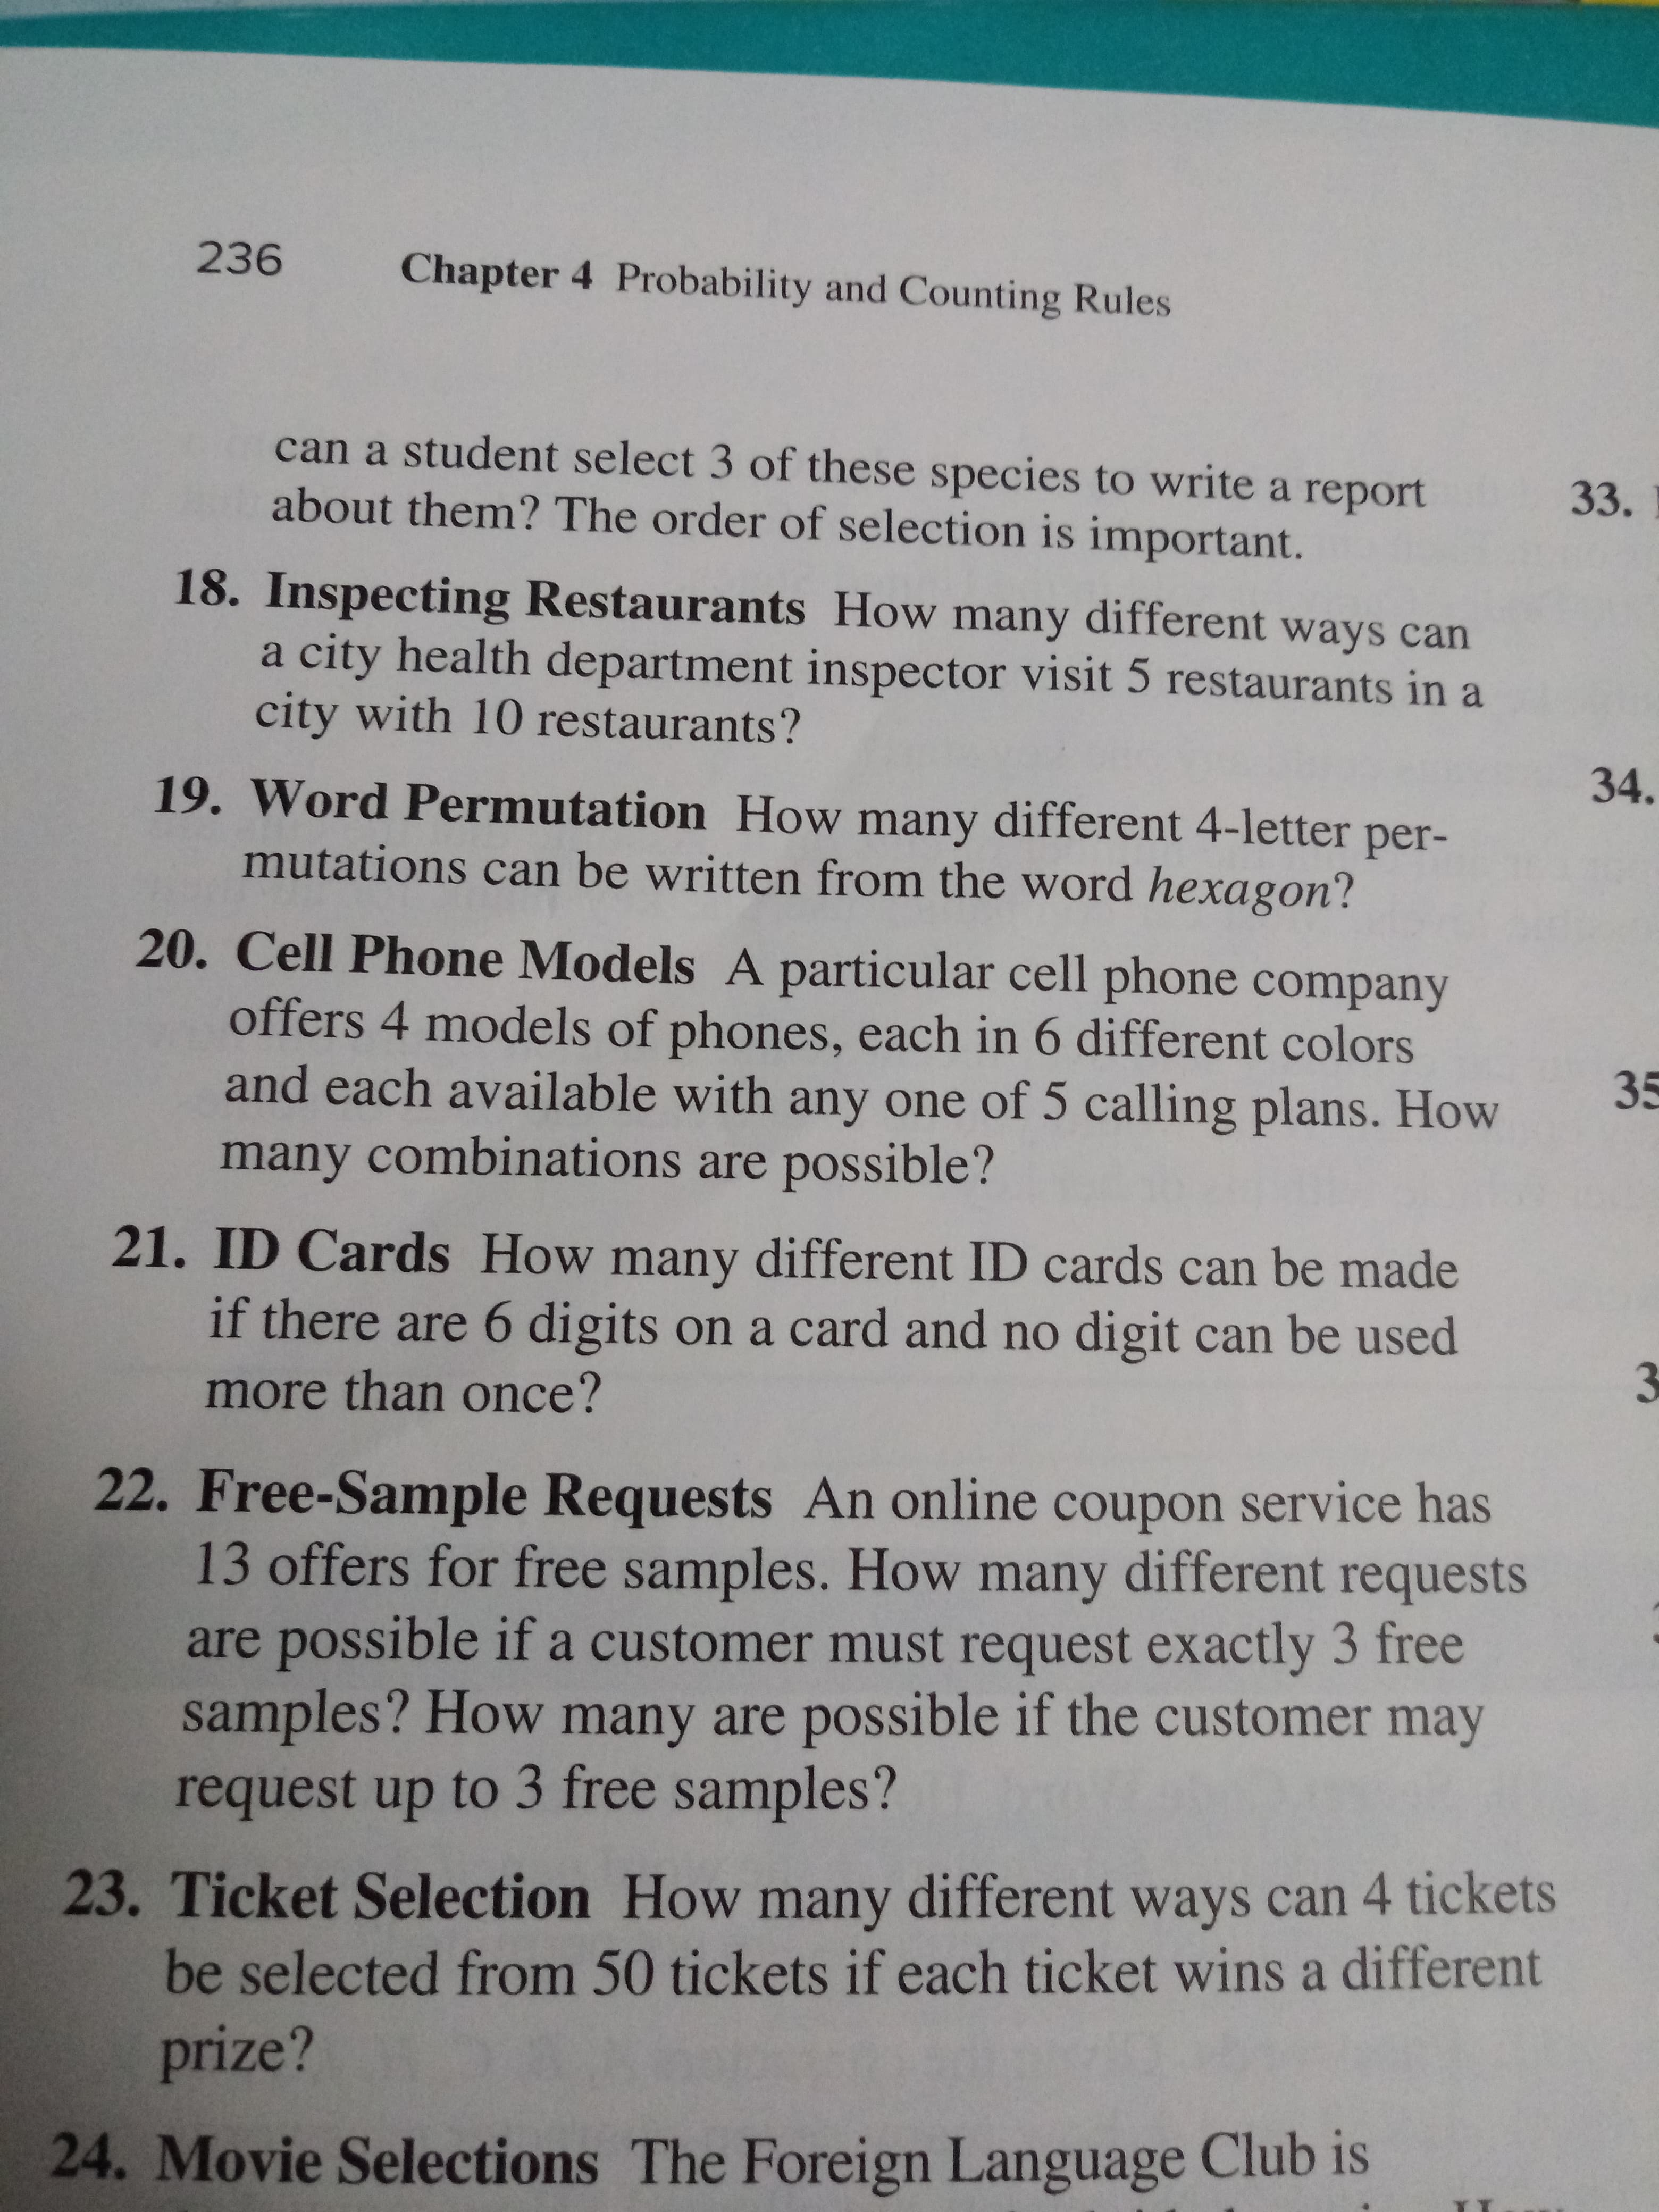 236
Chapter 4 Probability and Counting Rules
can a student select 3 of these species to write a report
about them? The order of selection is important.
33.
18. Inspecting Restaurants How many different ways can
a city health department inspector visit 5 restaurants in a
city with 10 restaurants?
34.
19. Word Permutation How many different 4-letter
per-
mutations can be written from the word hexagon?
20. Cell Phone Models A particular cell phone company
offers 4 models of phones, each in 6 different colors
and each available with any one of 5 calling plans. How
many combinations are possible ?
35
21. ID Cards How many different ID cards can be made
if there are 6 digits on a card and no digit can be used
3
more than once?
22. Free-Sample Requests An online coupon service has
13 offers for free samples. How many different requests
are possible if a customer must request exactly 3 free
samples? How many are possible if the customer may
request up to 3 free samples?
23. Ticket Selection How many different ways can 4 tickets
be selected from 50 tickets if each ticket wins a different
prize?
24. Movie Selections The Foreign Language Club is
